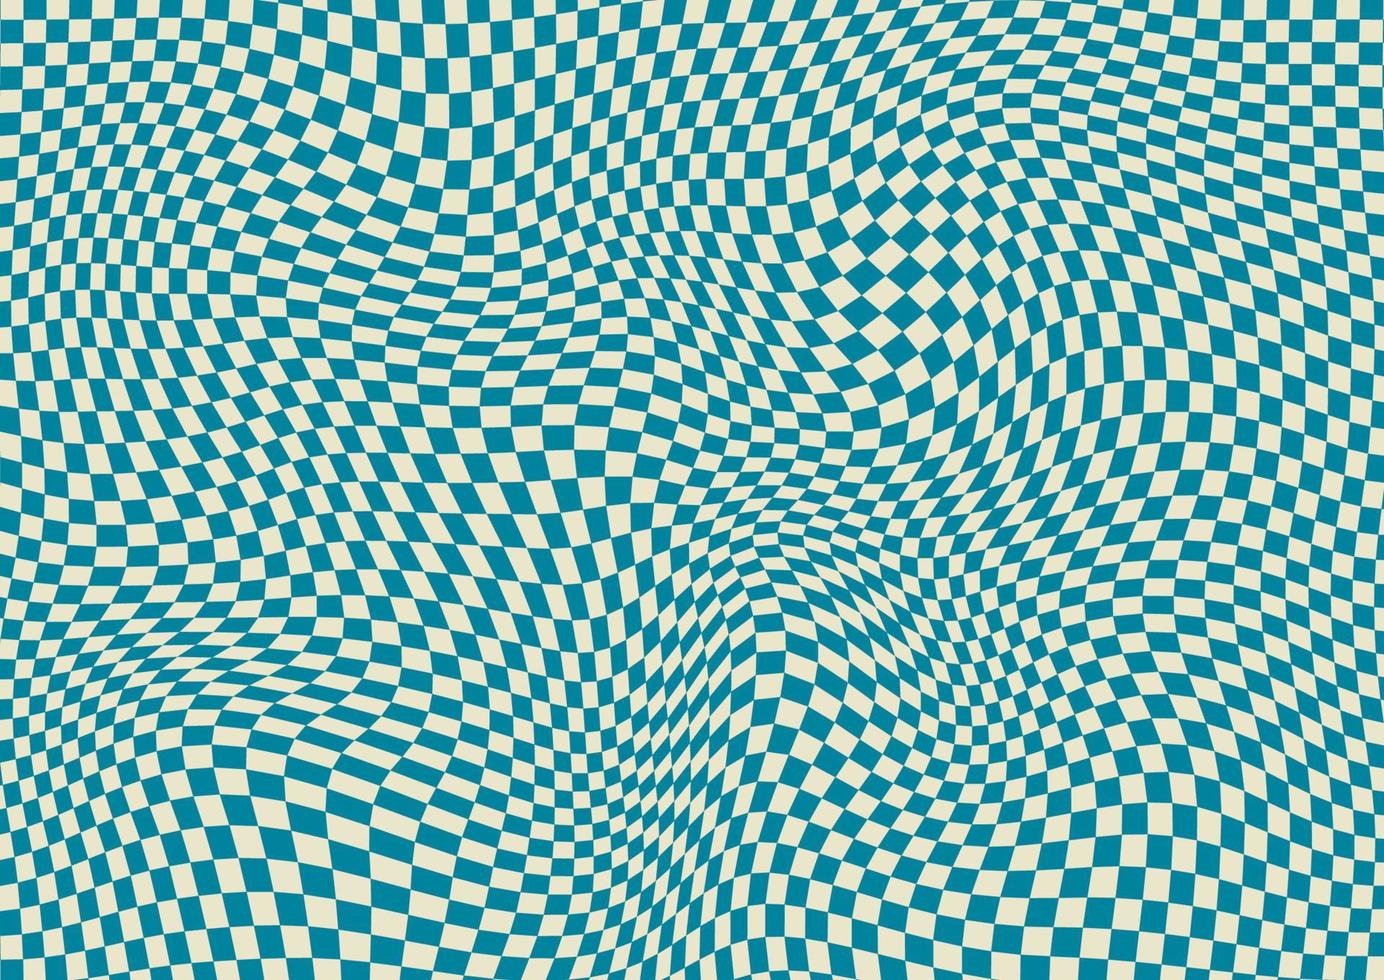 abstract background with distorted checkerboard design vector